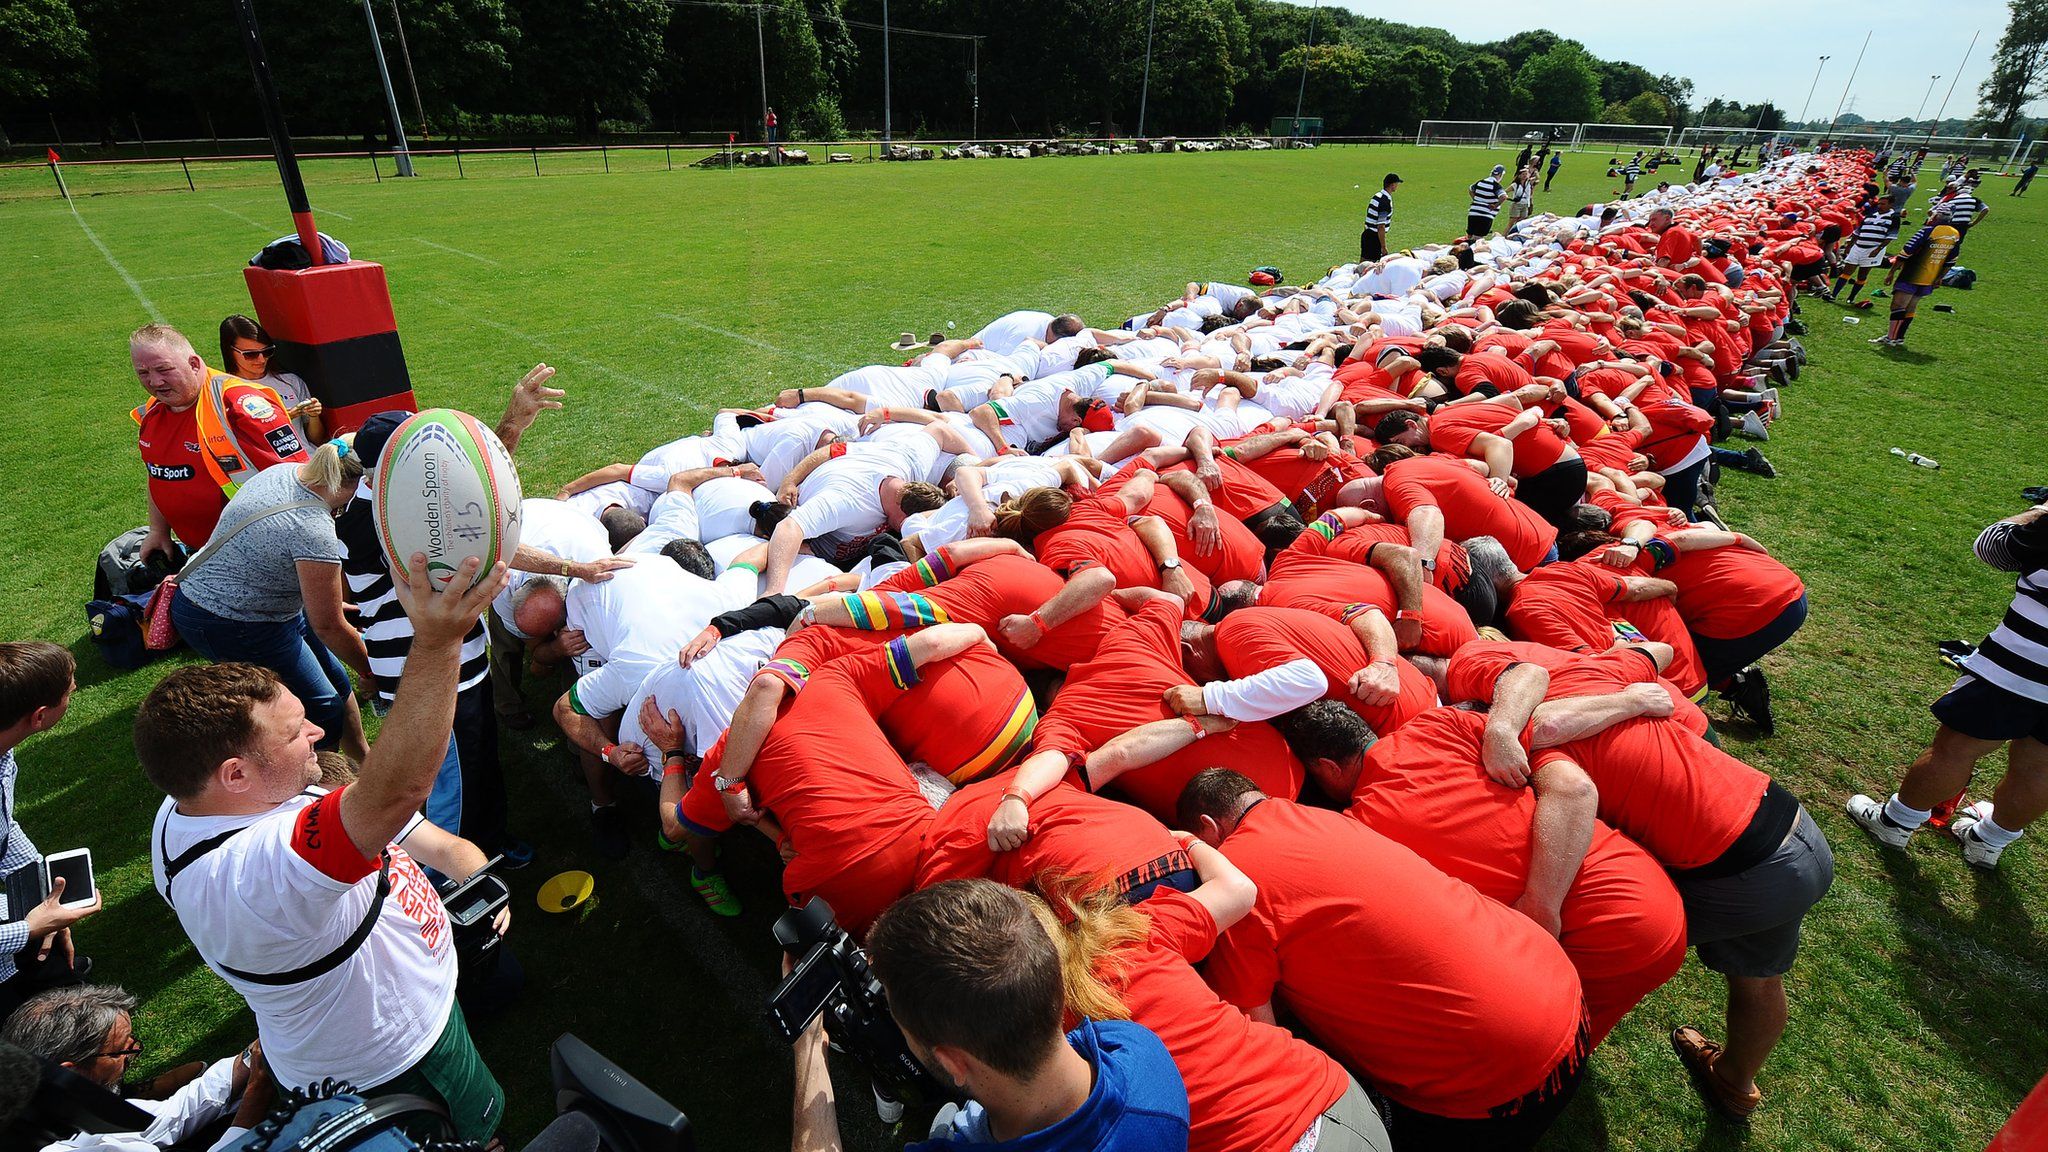 Rugby players attempt a scrum world record at University Fields in the Llanrumney area Cardiff